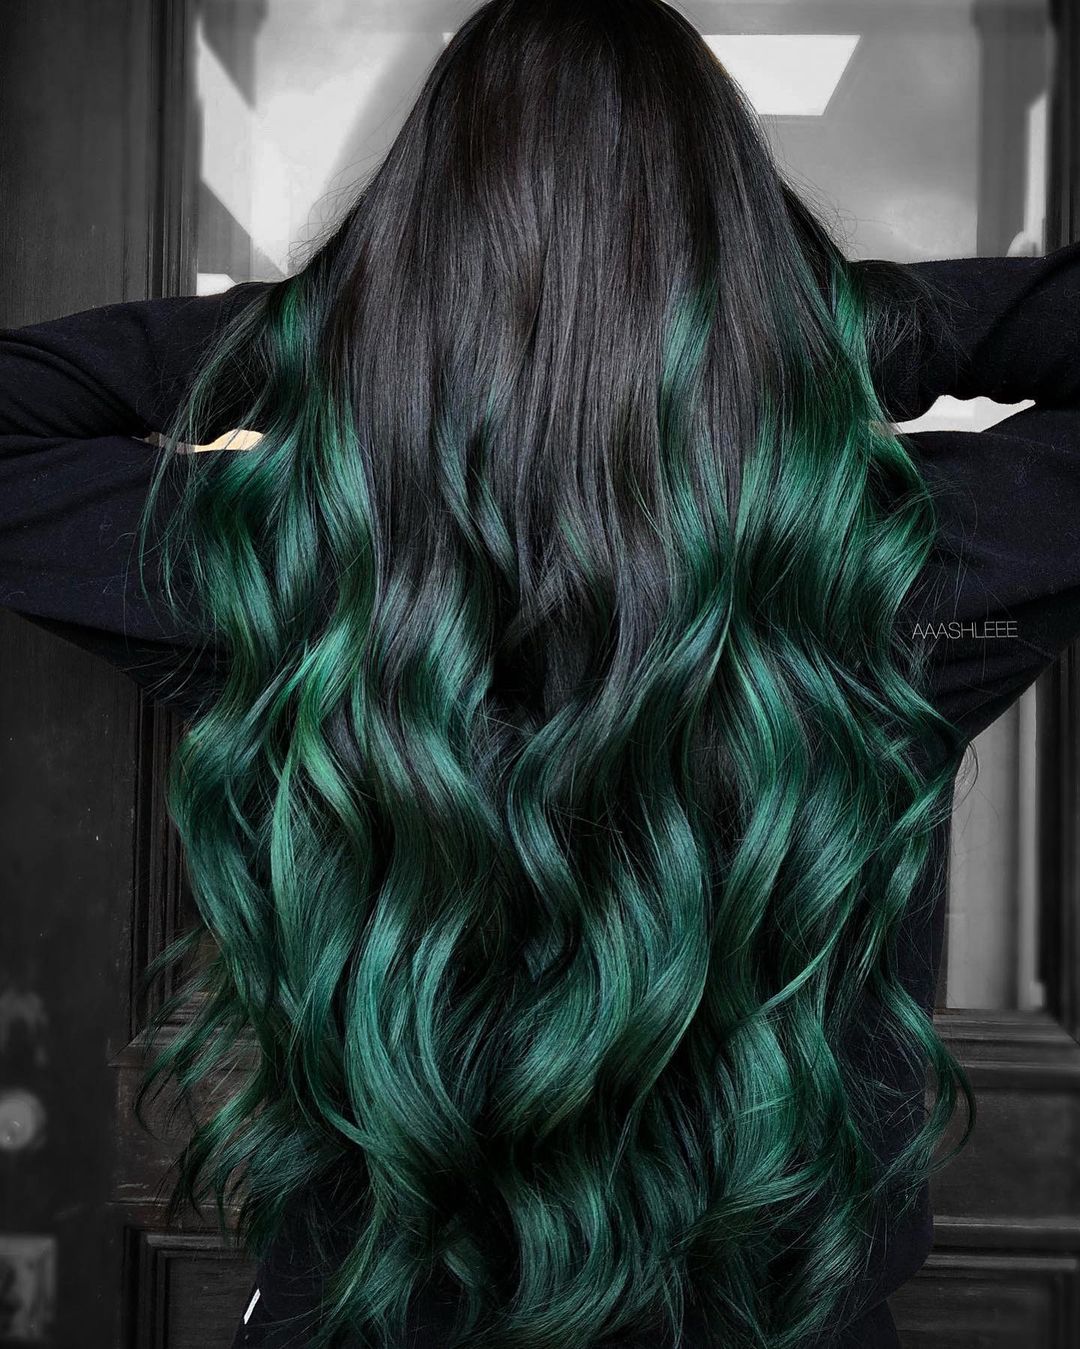 Long Black Hair with Green Ends